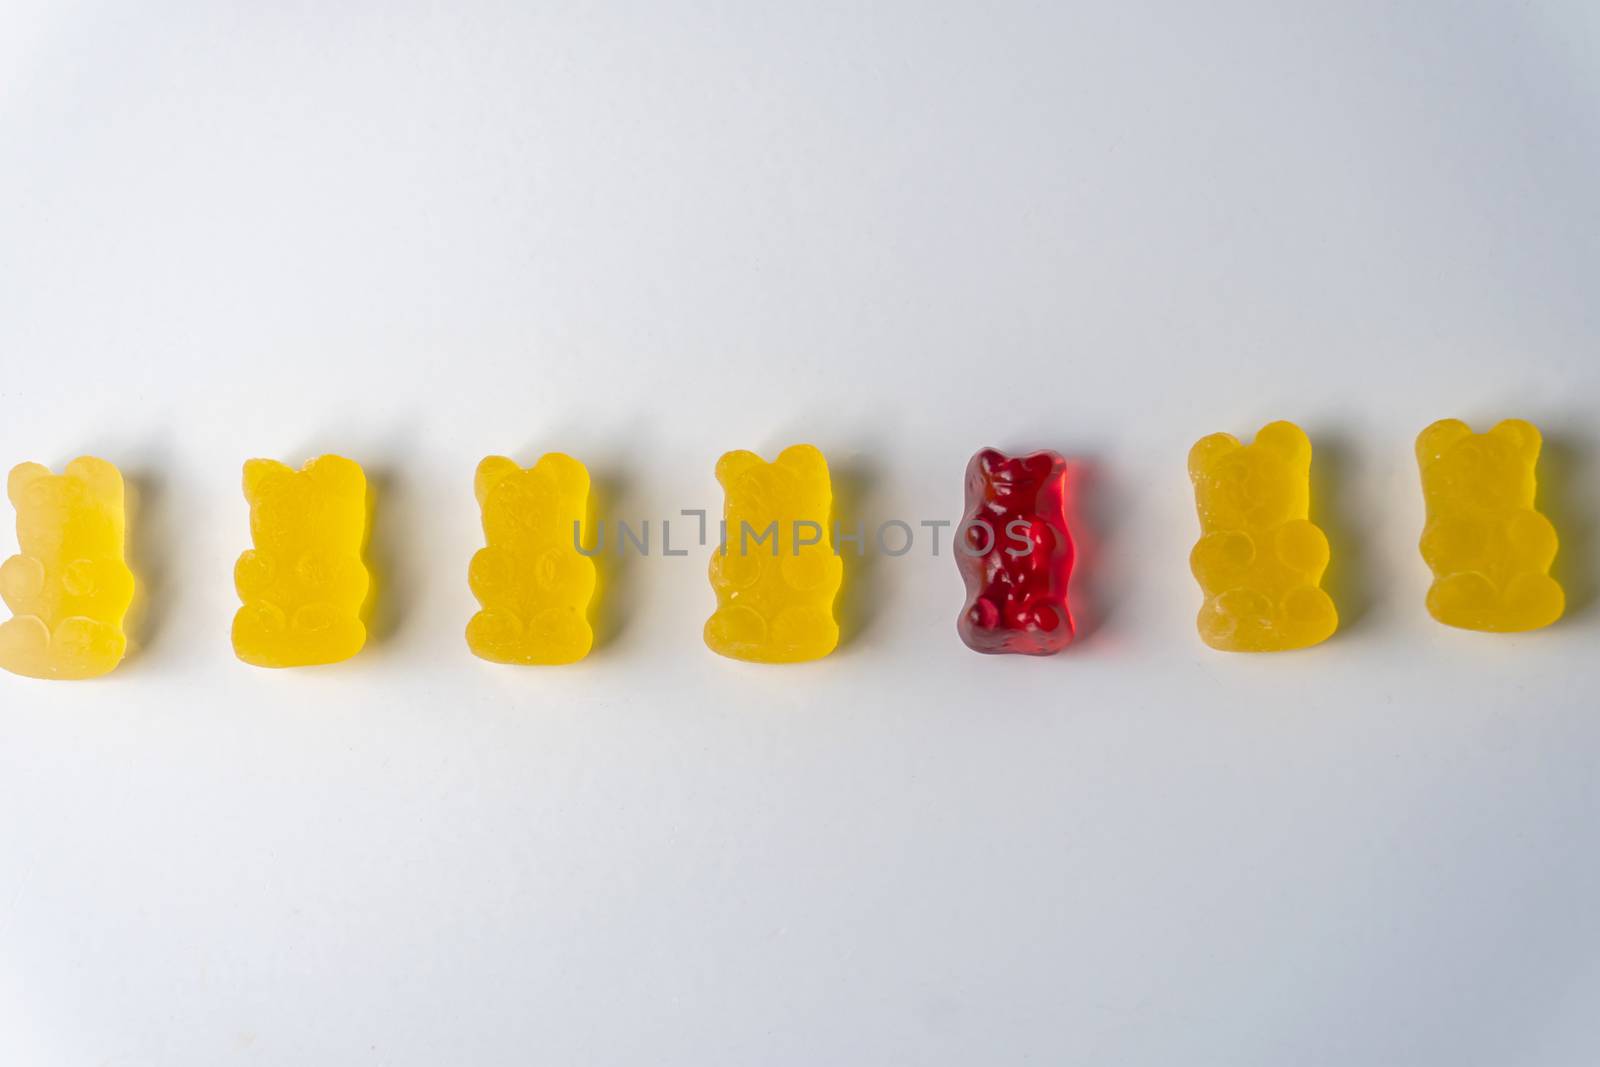 Row of yellow and red jelly bears candy on a white background.